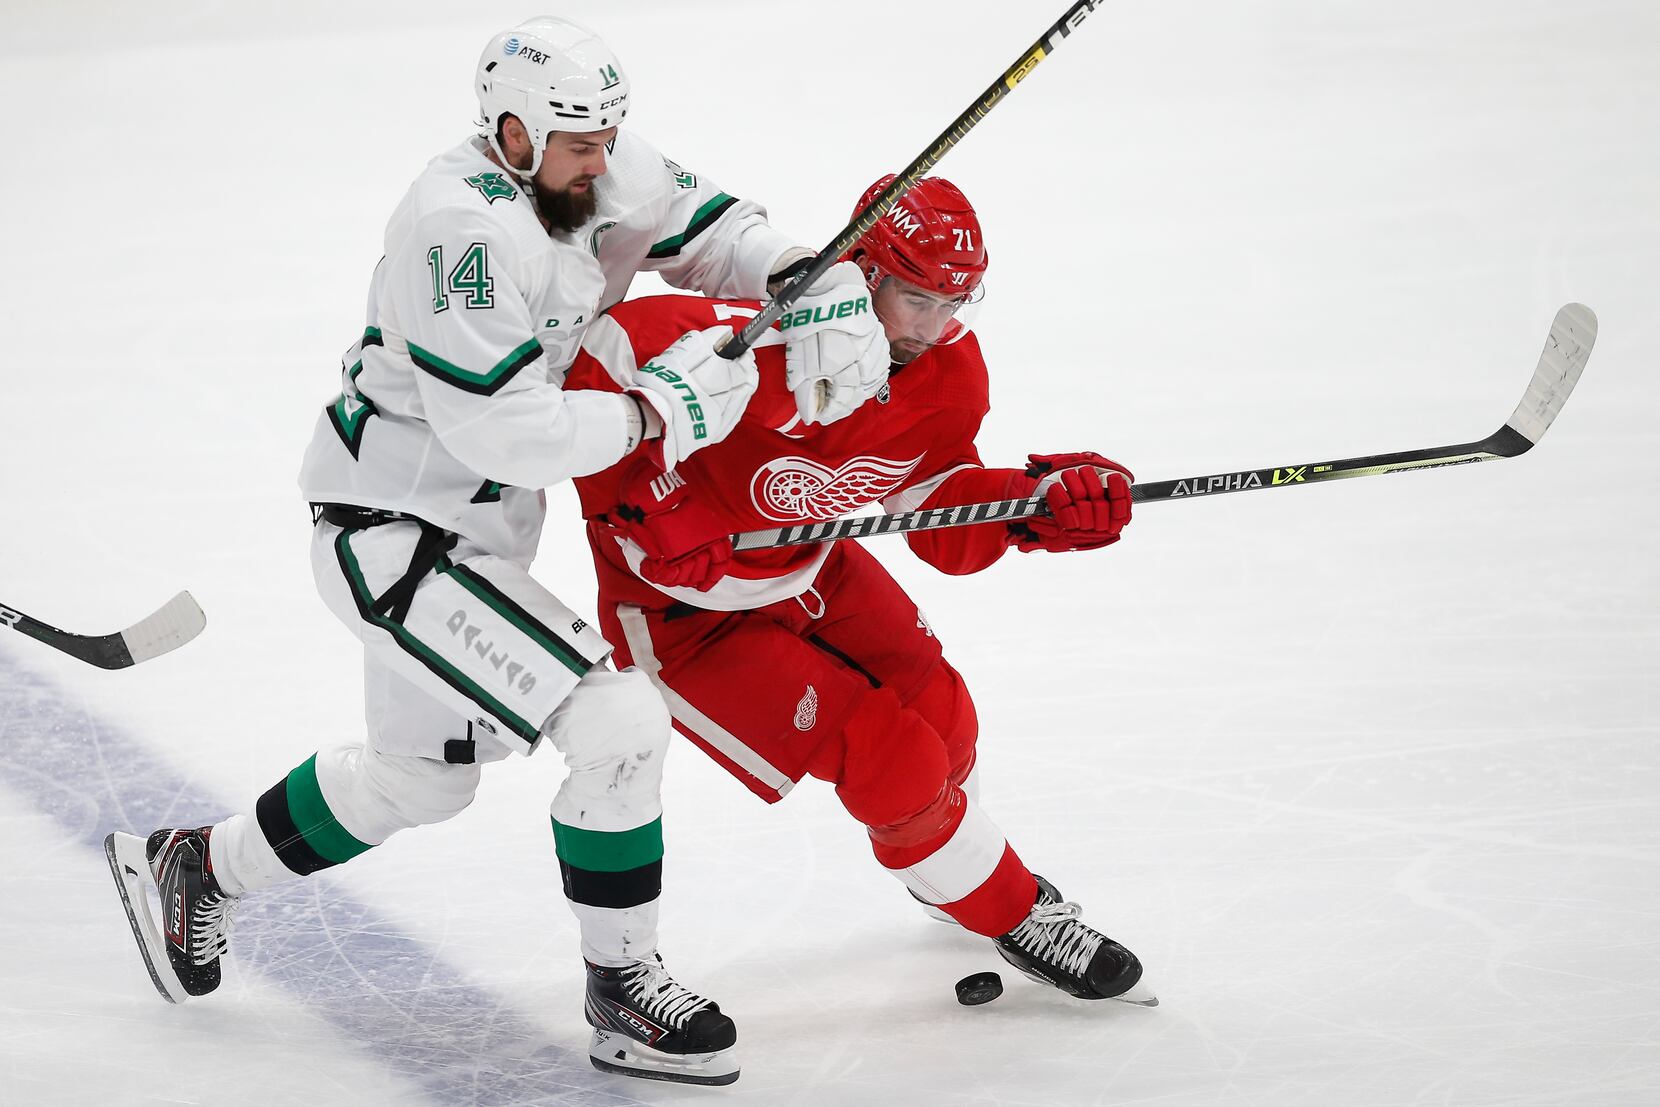 Red Wings' Larkin knocked unconscious after cross-check from behind 